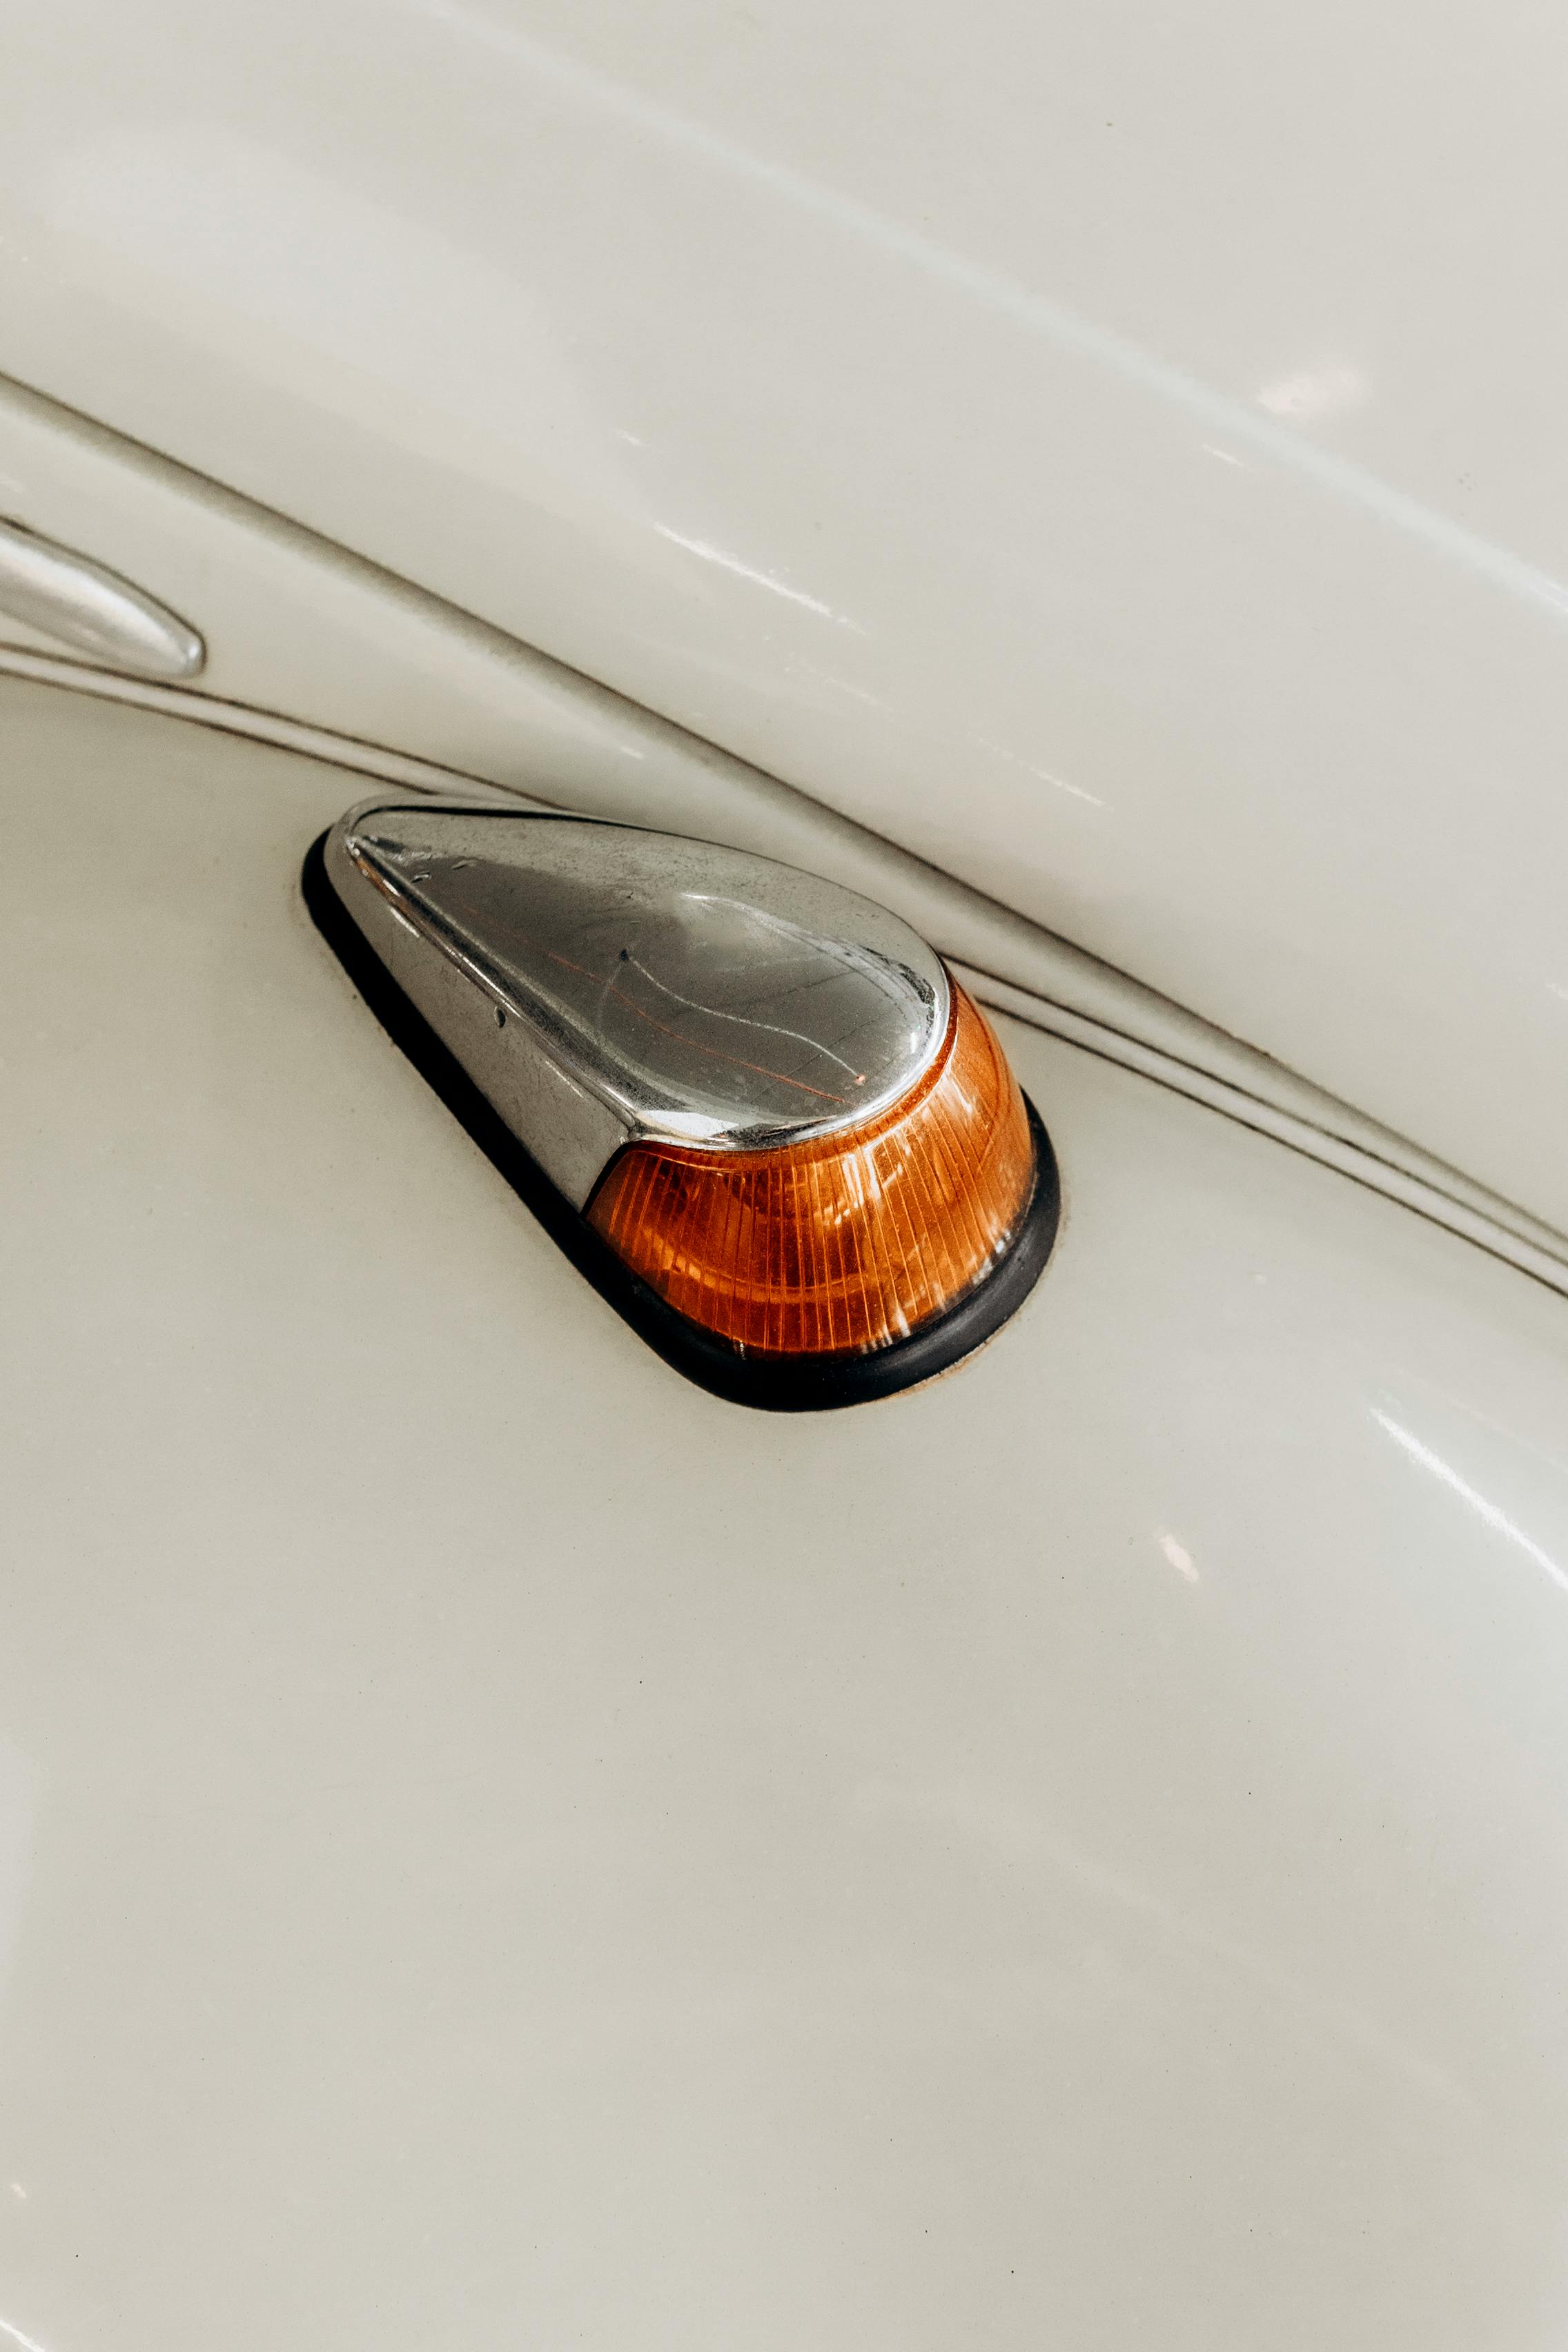 152 Blinker Auto Stock Photos, High-Res Pictures, and Images